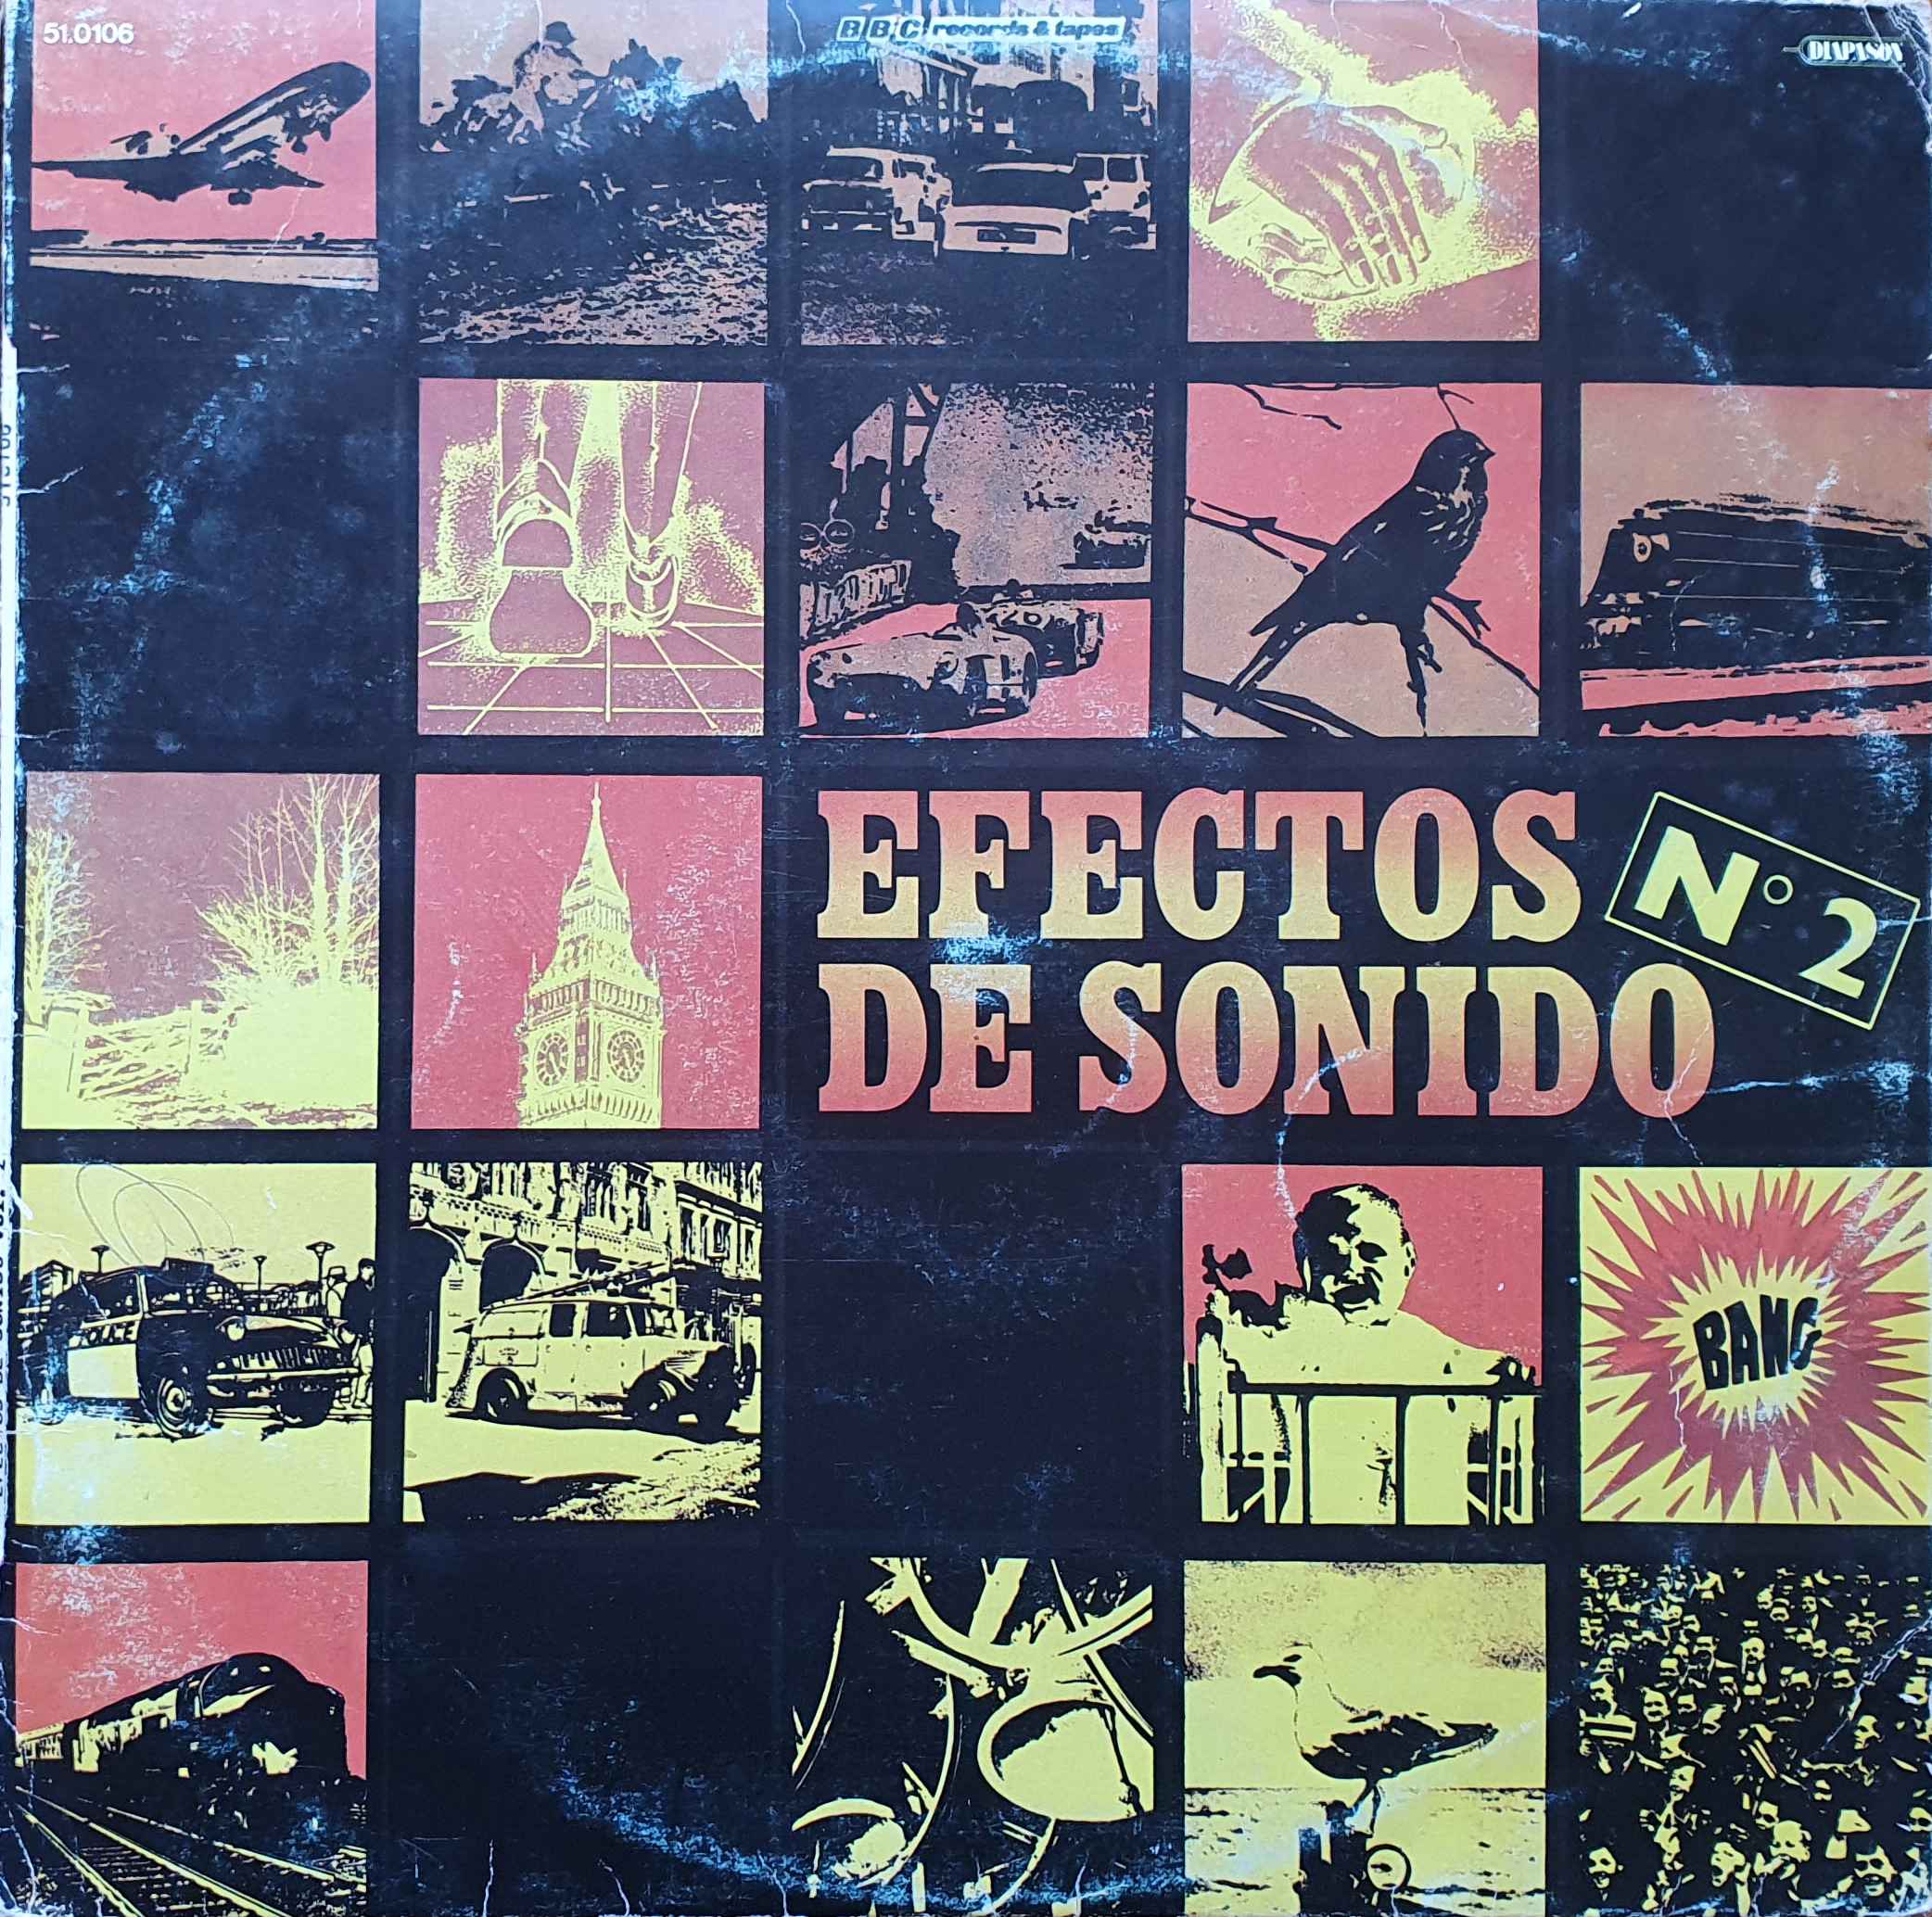 Picture of Efectos de sonido No 2 by artist Various from the BBC albums - Records and Tapes library